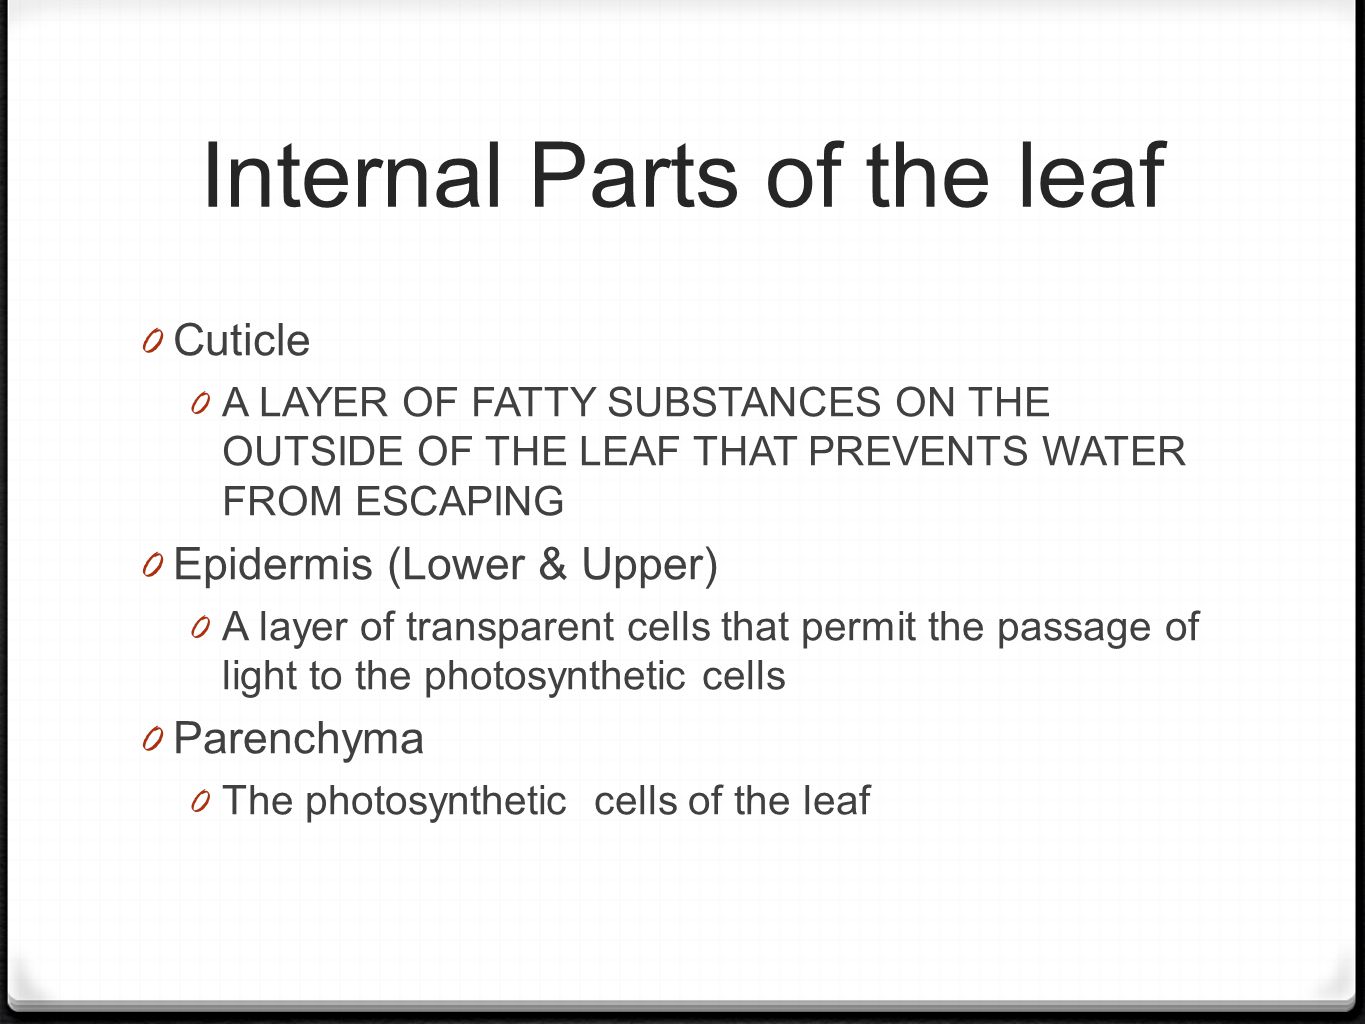 Internal Parts of the leaf 0 Cuticle 0 A LAYER OF FATTY SUBSTANCES ON THE OUTSIDE OF THE LEAF THAT PREVENTS WATER FROM ESCAPING 0 Epidermis (Lower & Upper) 0 A layer of transparent cells that permit the passage of light to the photosynthetic cells 0 Parenchyma 0 The photosynthetic cells of the leaf